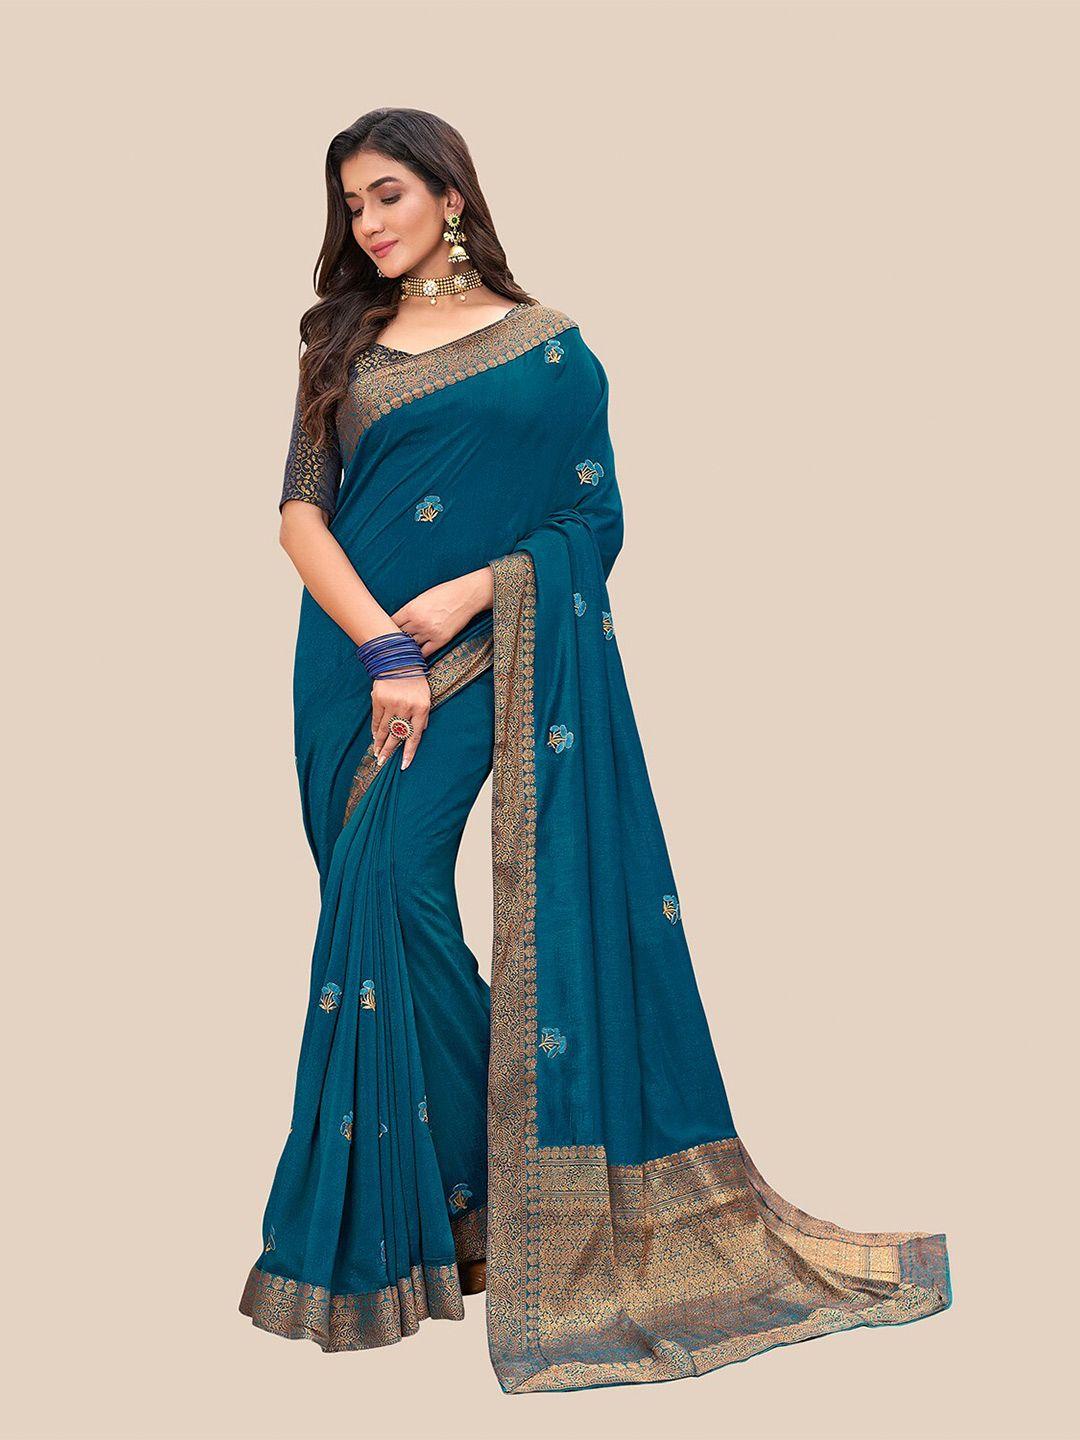 united liberty teal & gold-toned floral embroidered art silk block print saree